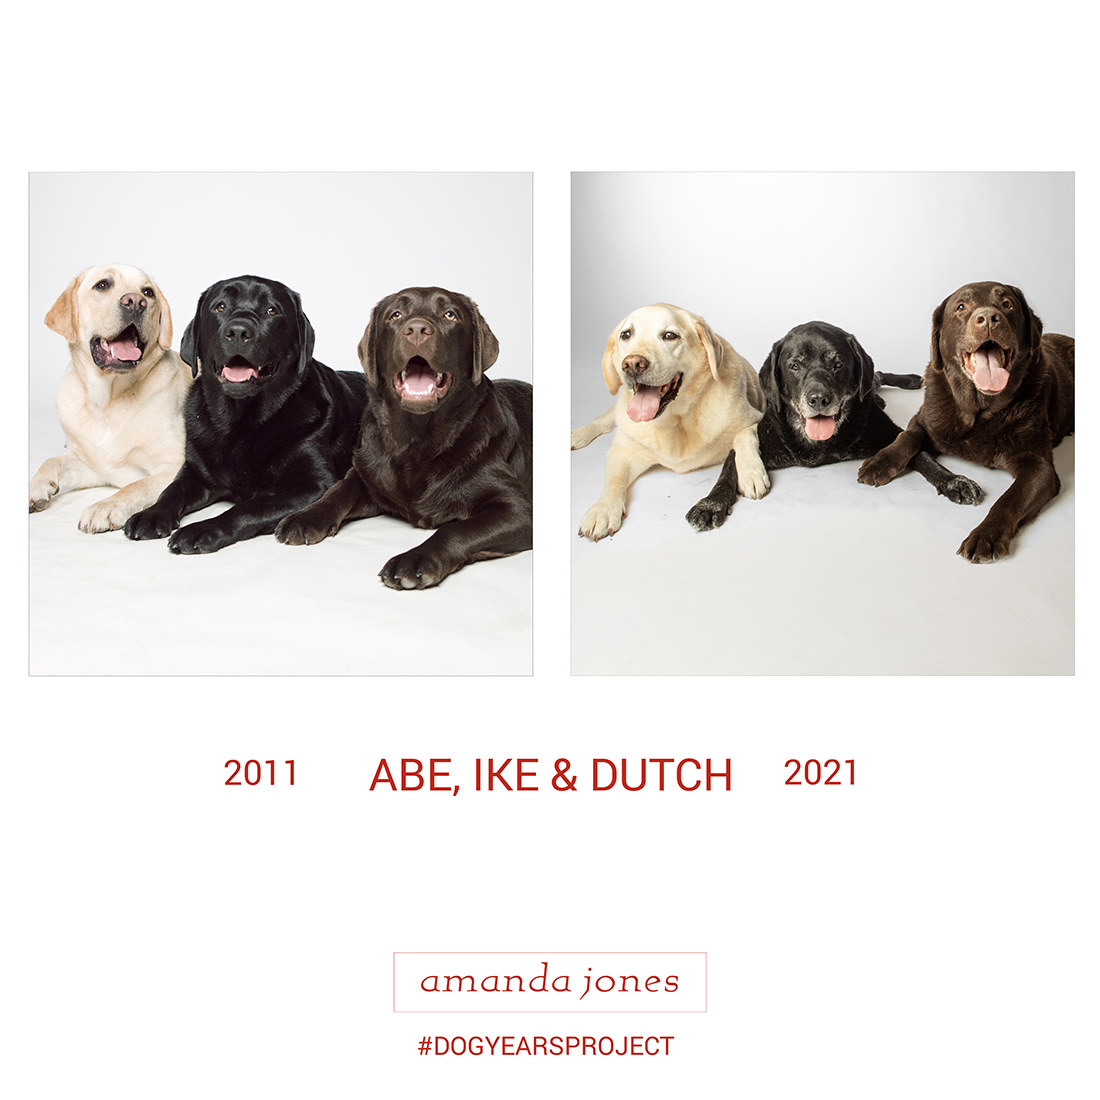 photograph of three dogs named abe ike and dutch in 2011 and again in 2021